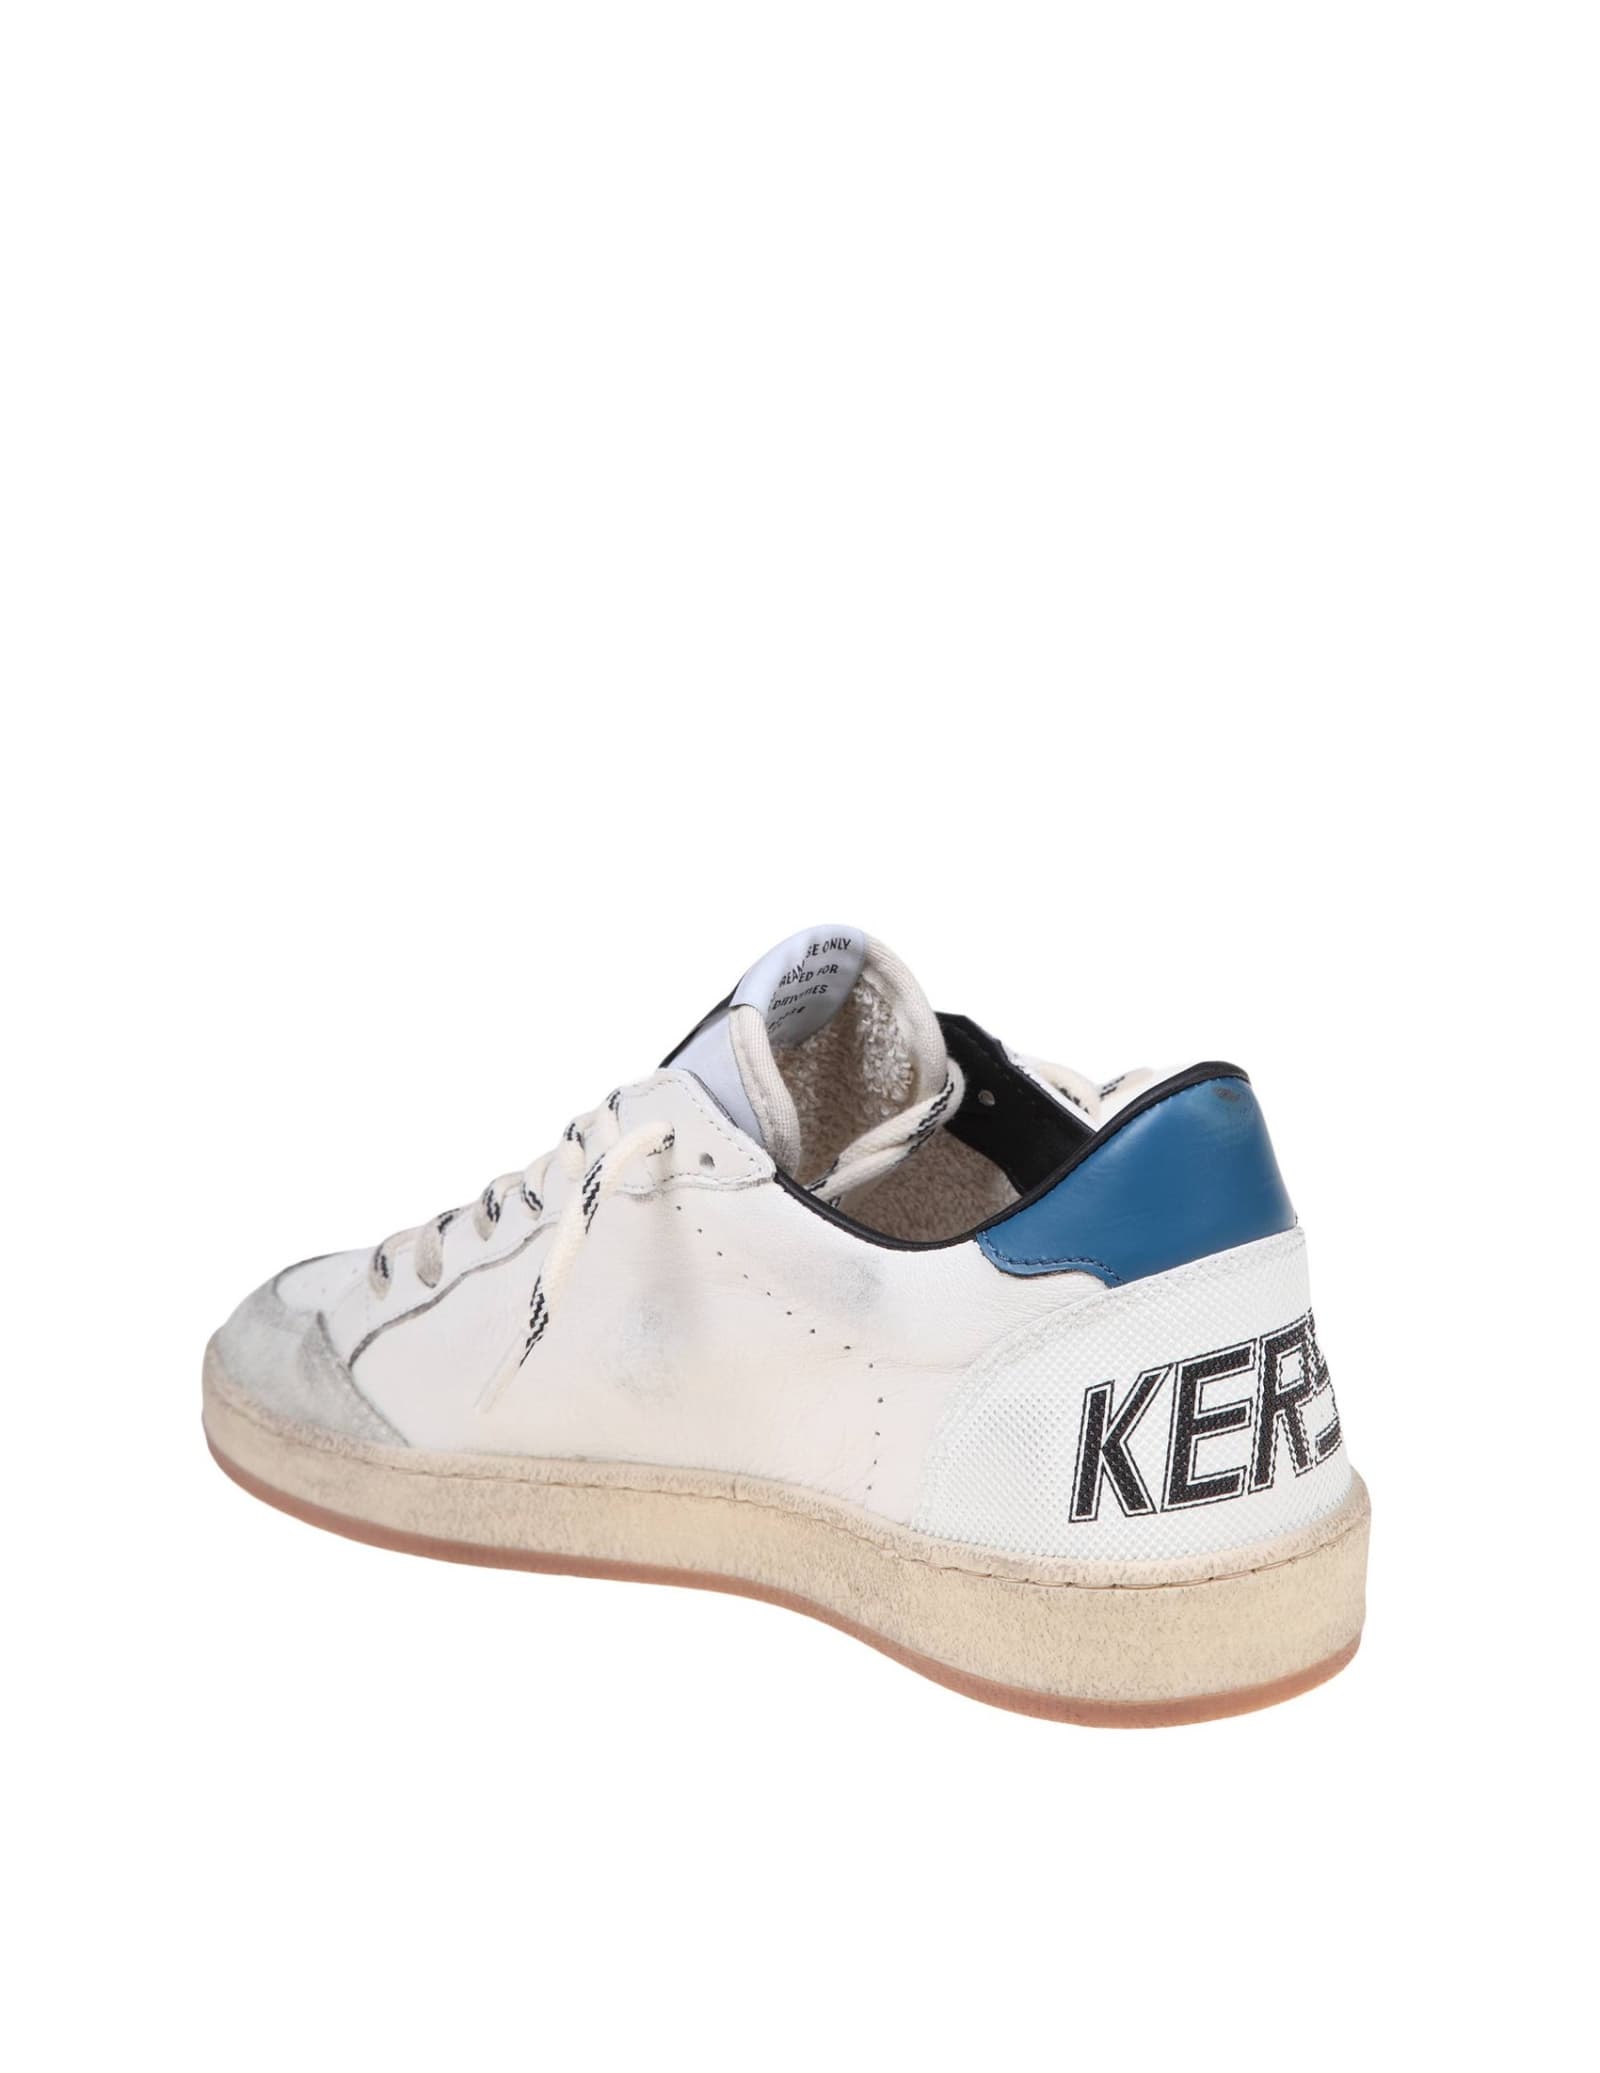 Shop Golden Goose Ballstar Sneakers In White Leather And Suede In White/red/ice/